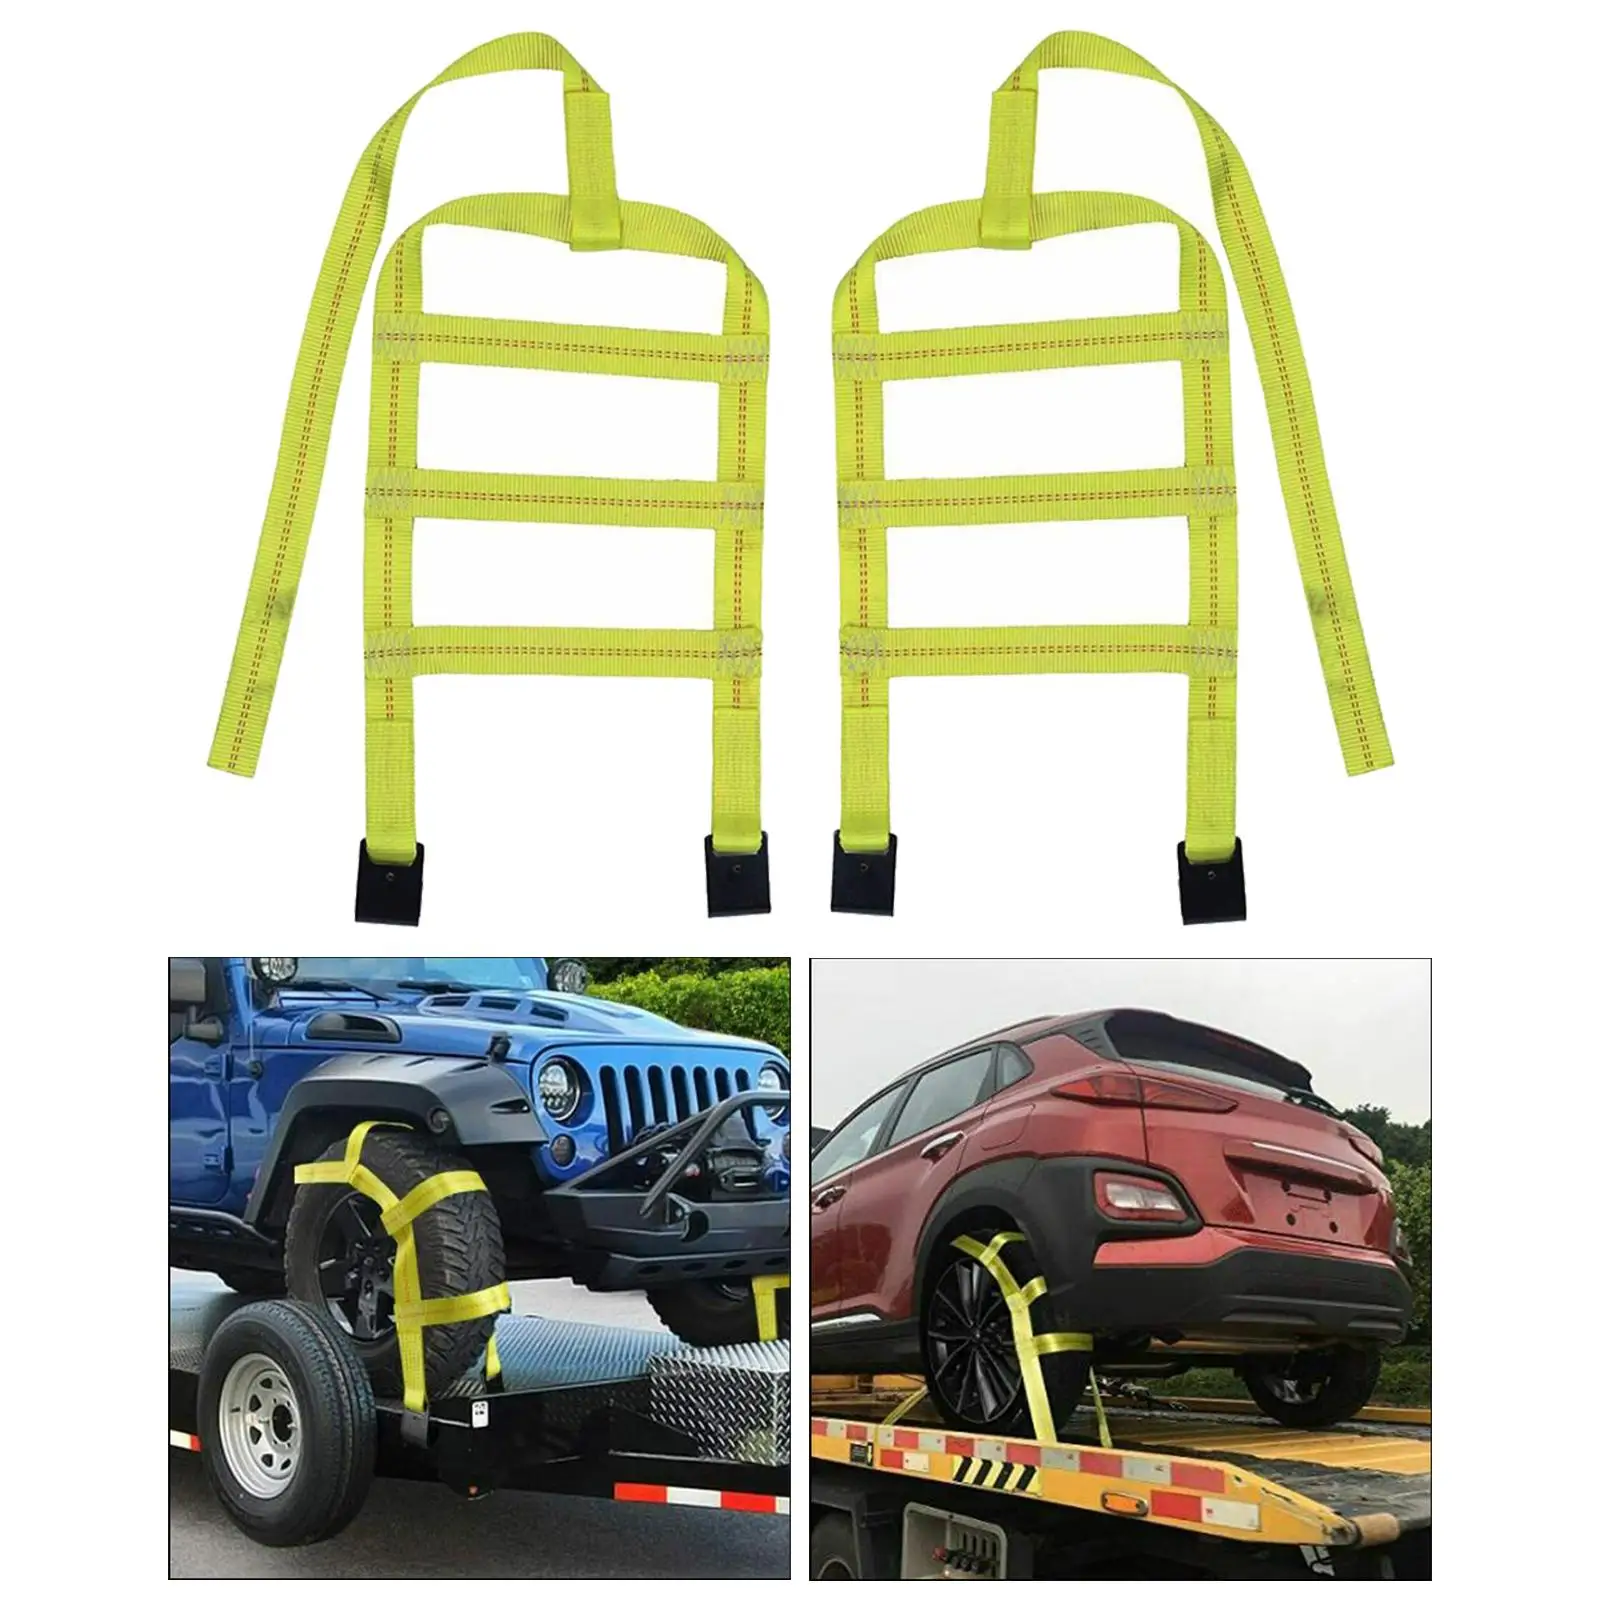 Tow Straps Net Basket with Flat Hooks Yellow Car Tire Tow Straps Car Basket Straps for 14-17inch Tires